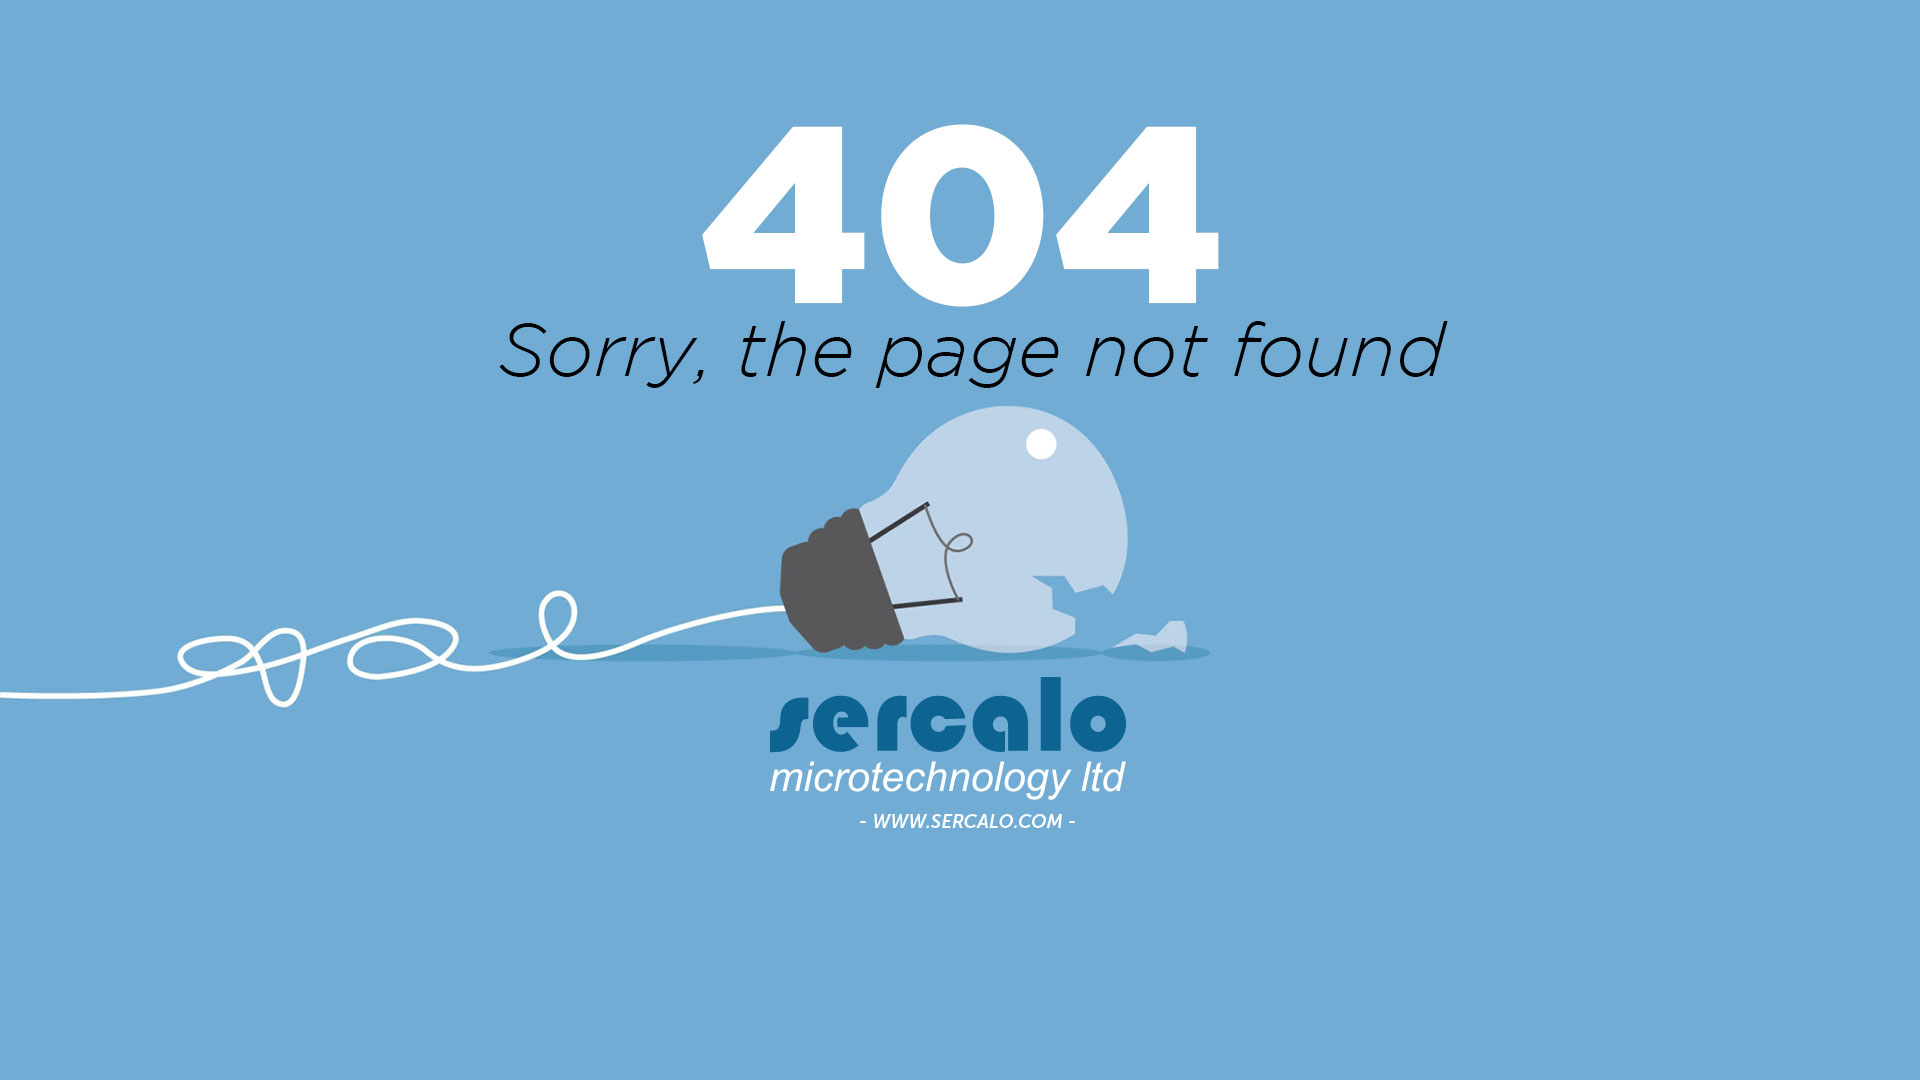 Error 404, Sorry the page not found